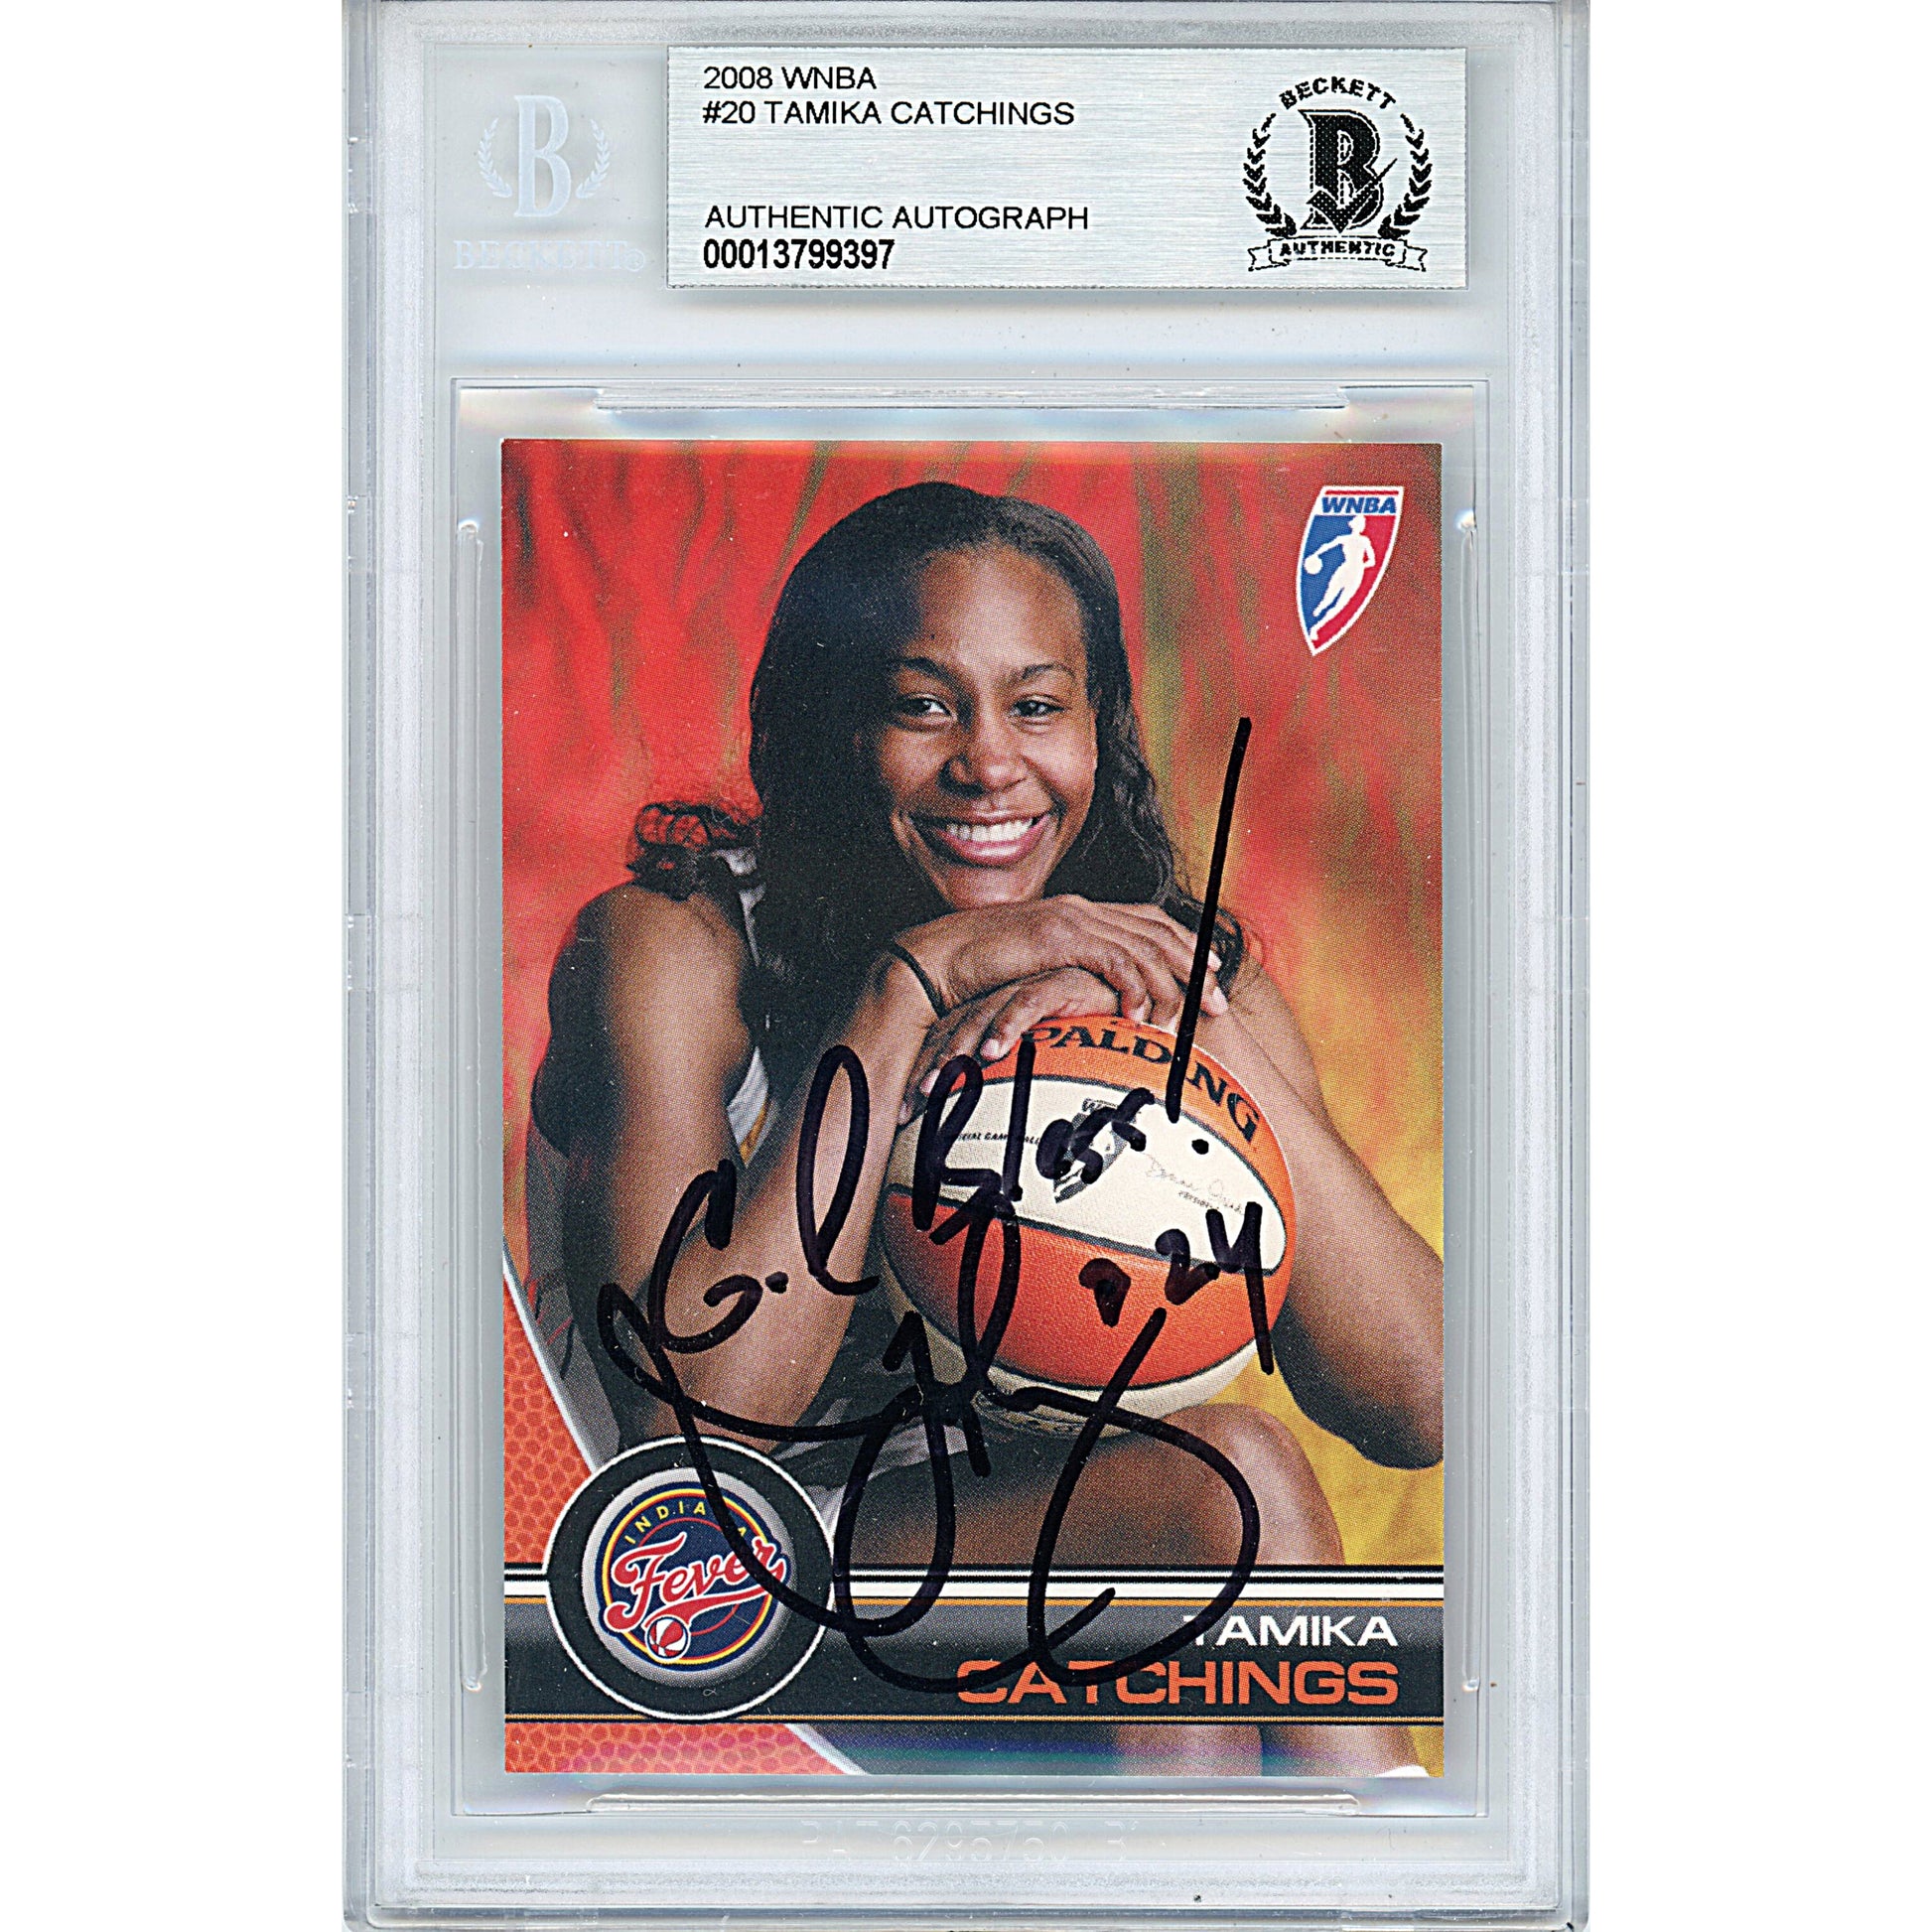 Basketballs- Autographed- Tamika Catchings Signed Indiana Fever 2008 WNBA Basketball Card Beckett BAS Slabbed 00013799397 - 101